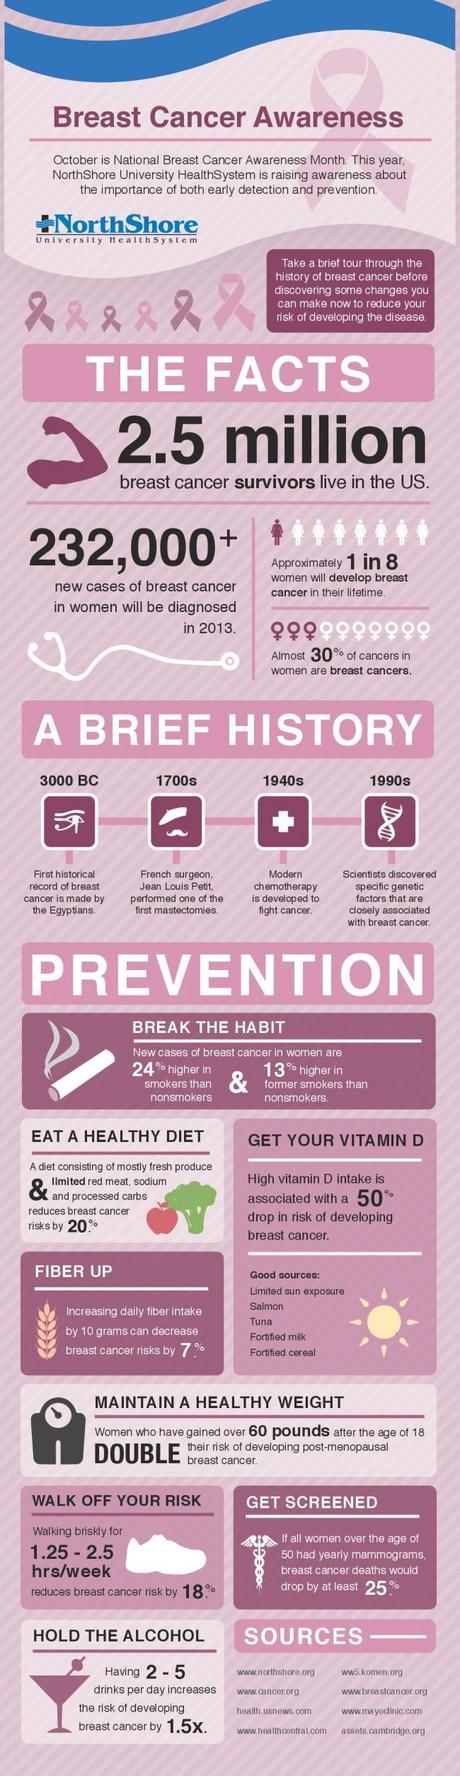 Think Pink: Breast Cancer History, Risk Factors, and Prevention